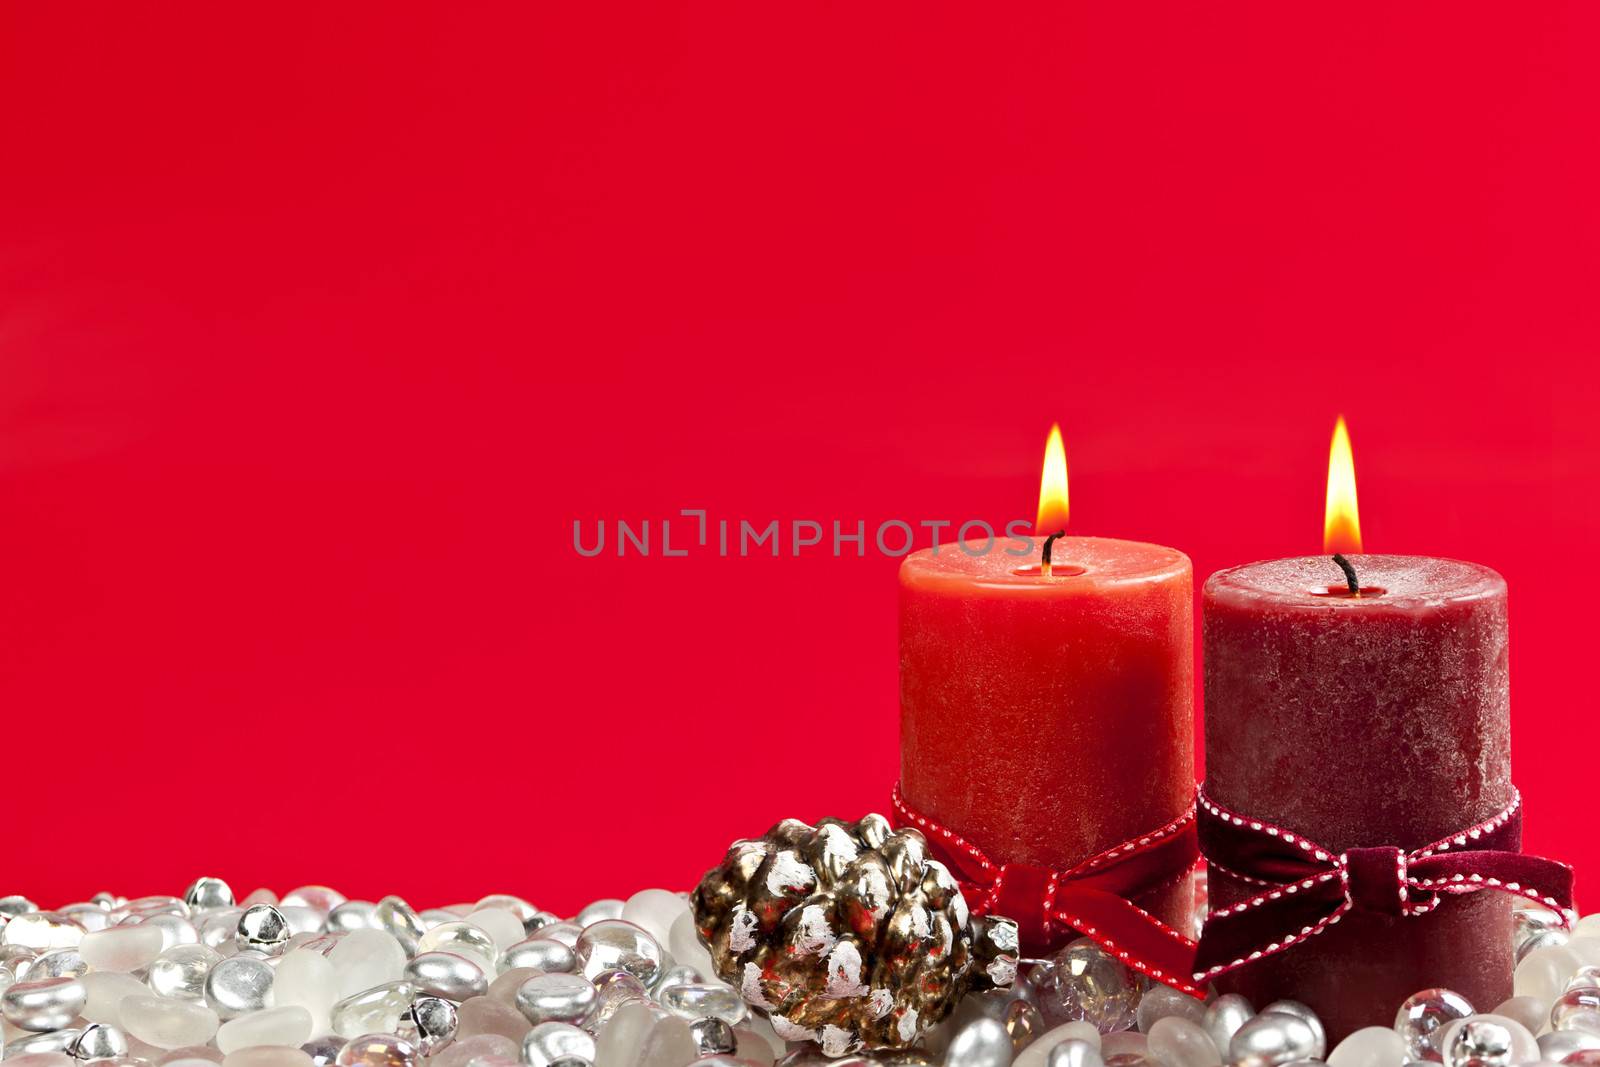 Christmas candles and decorations on red background